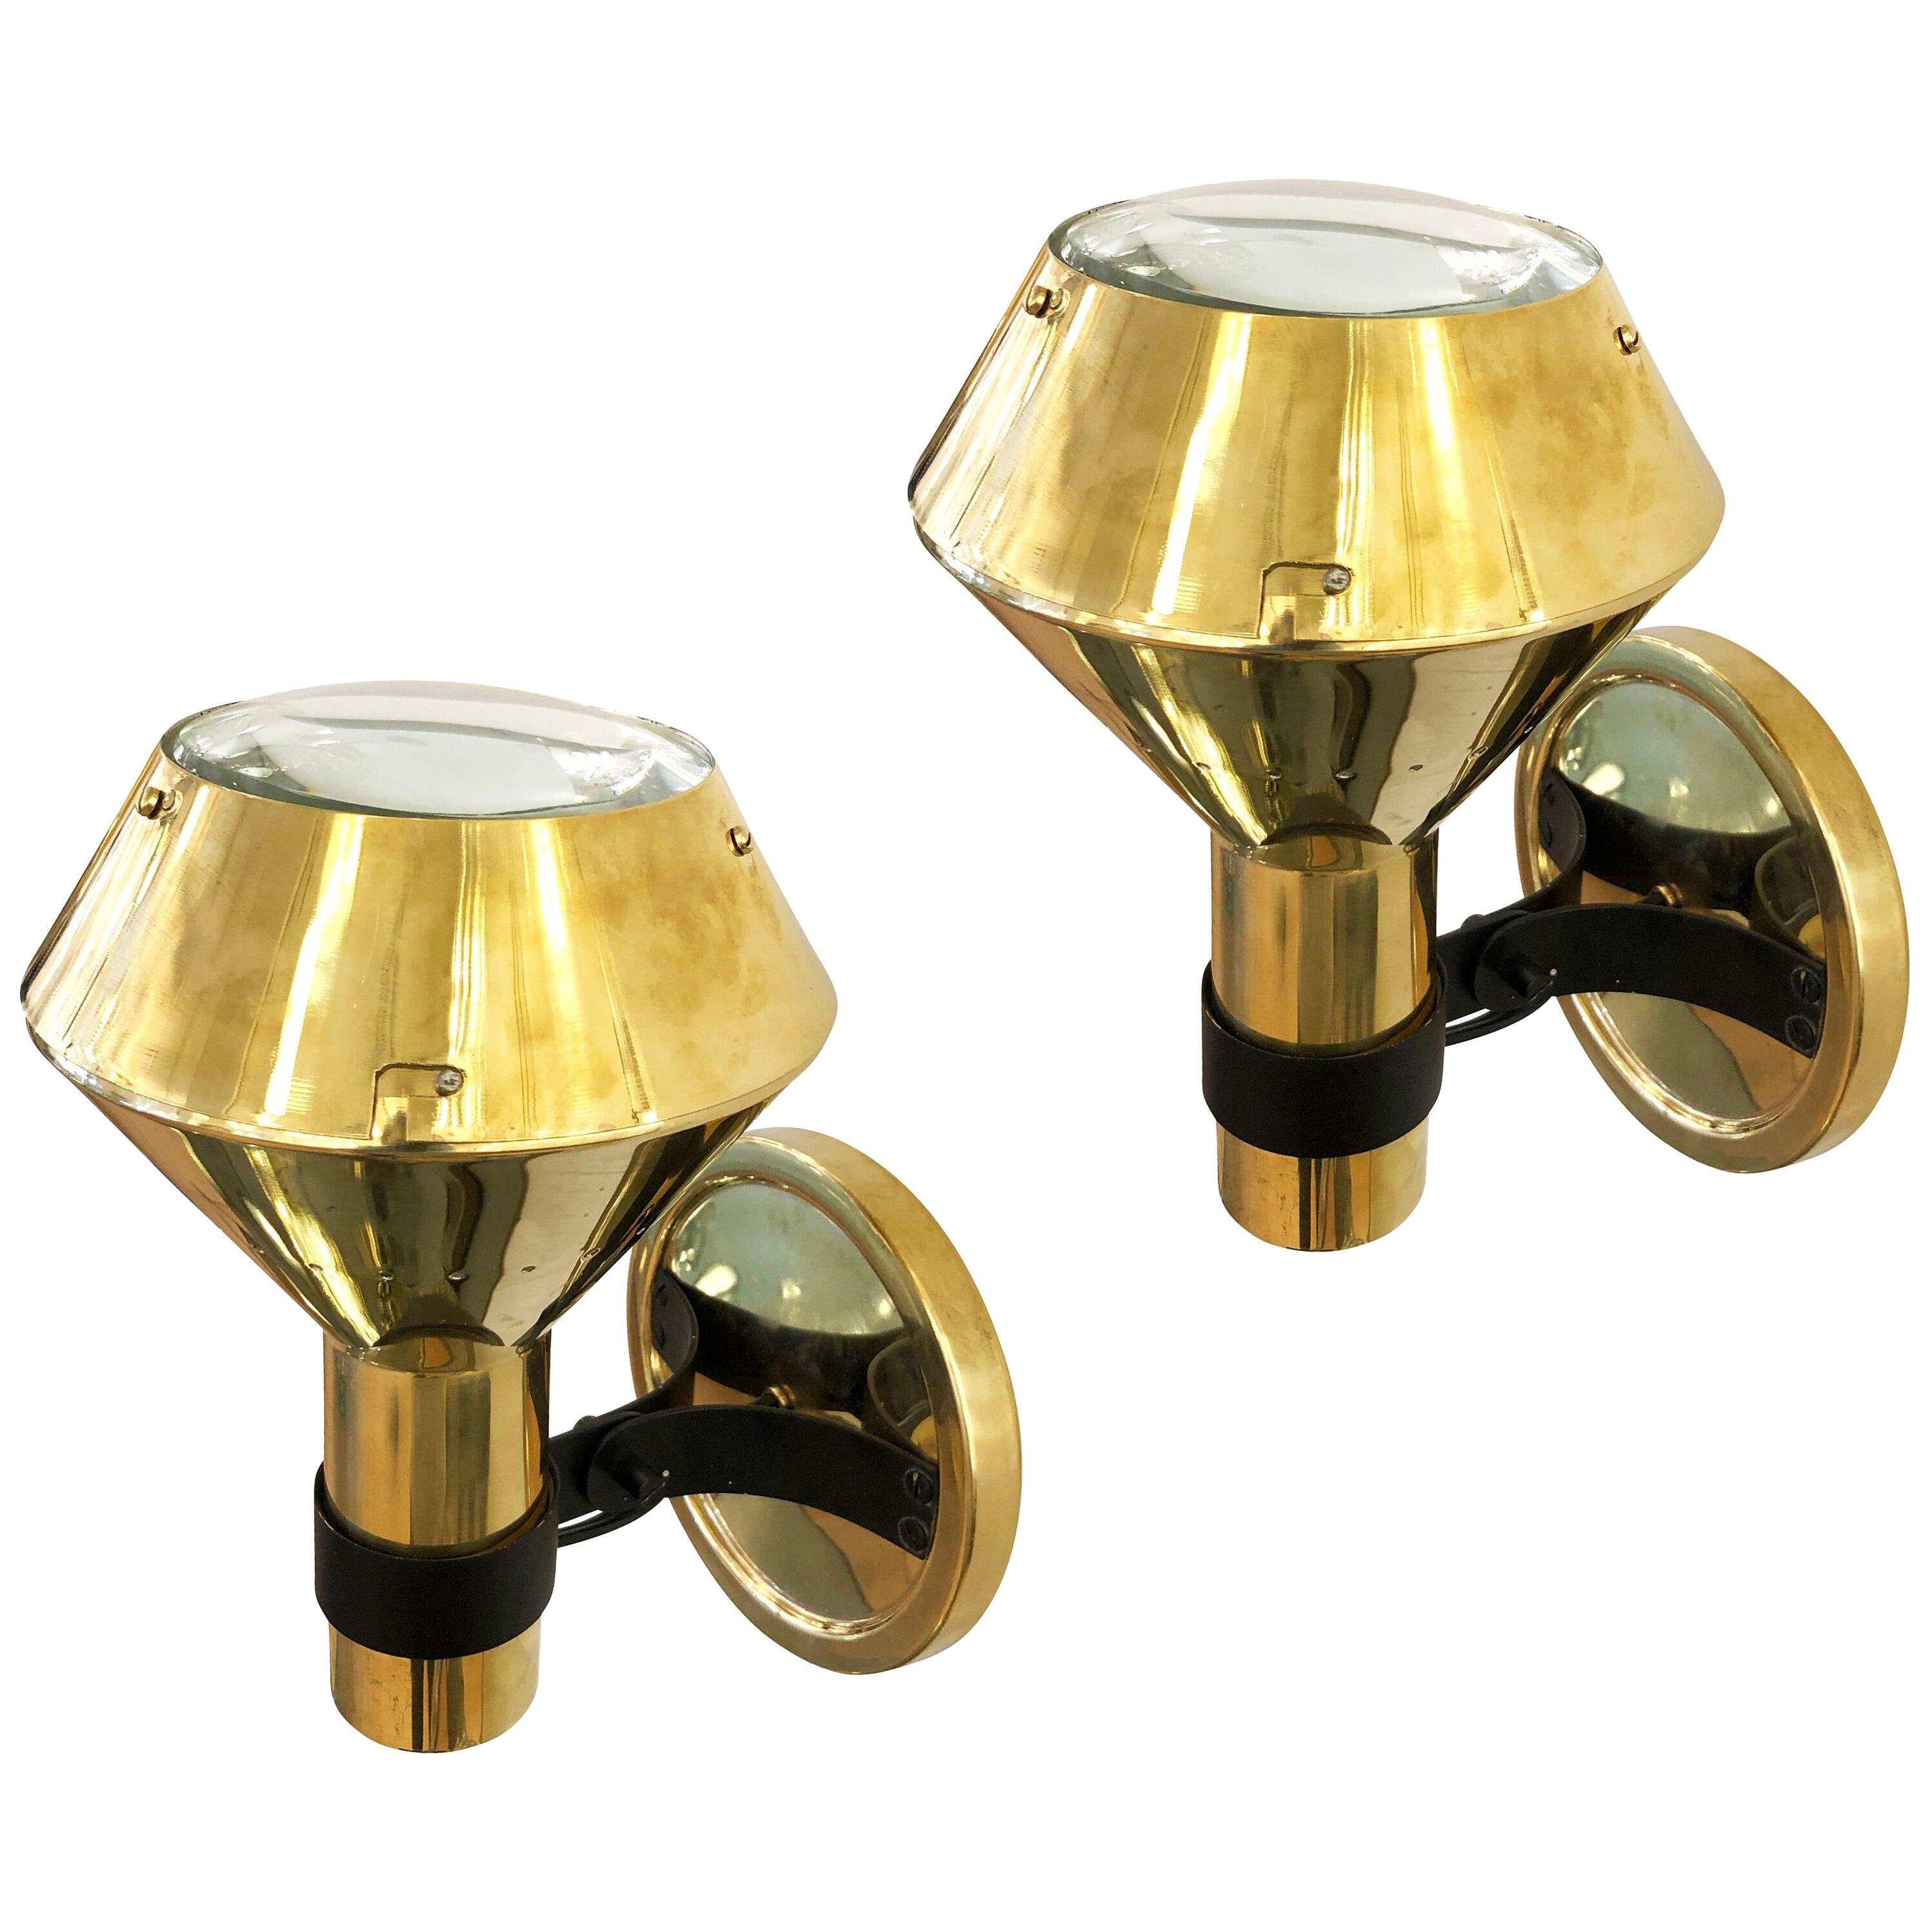 Brass Sconces by Candle, 3 Pairs Available